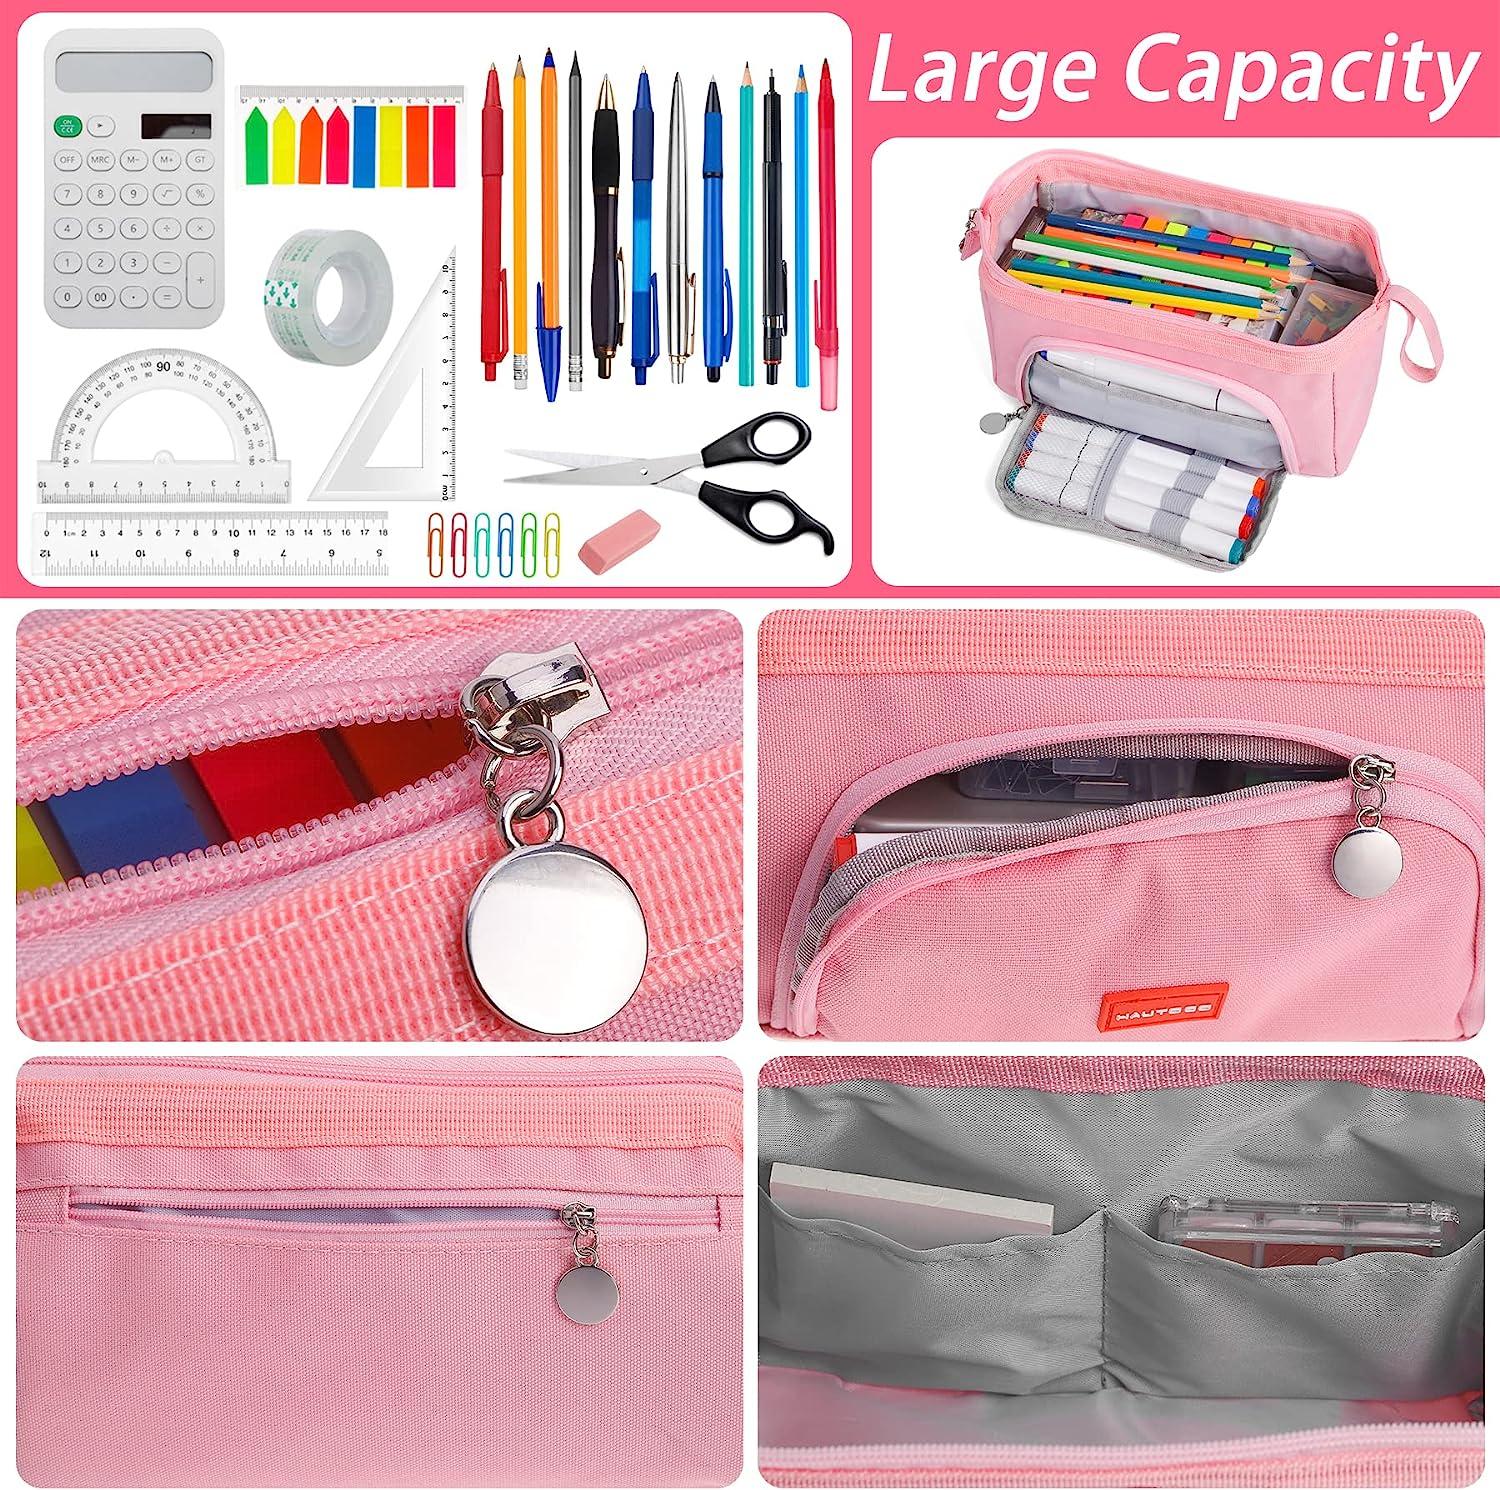 Pencil Pouch Large Capacity Pencil Case Pencil Bag for School Office Pink  and Blue 